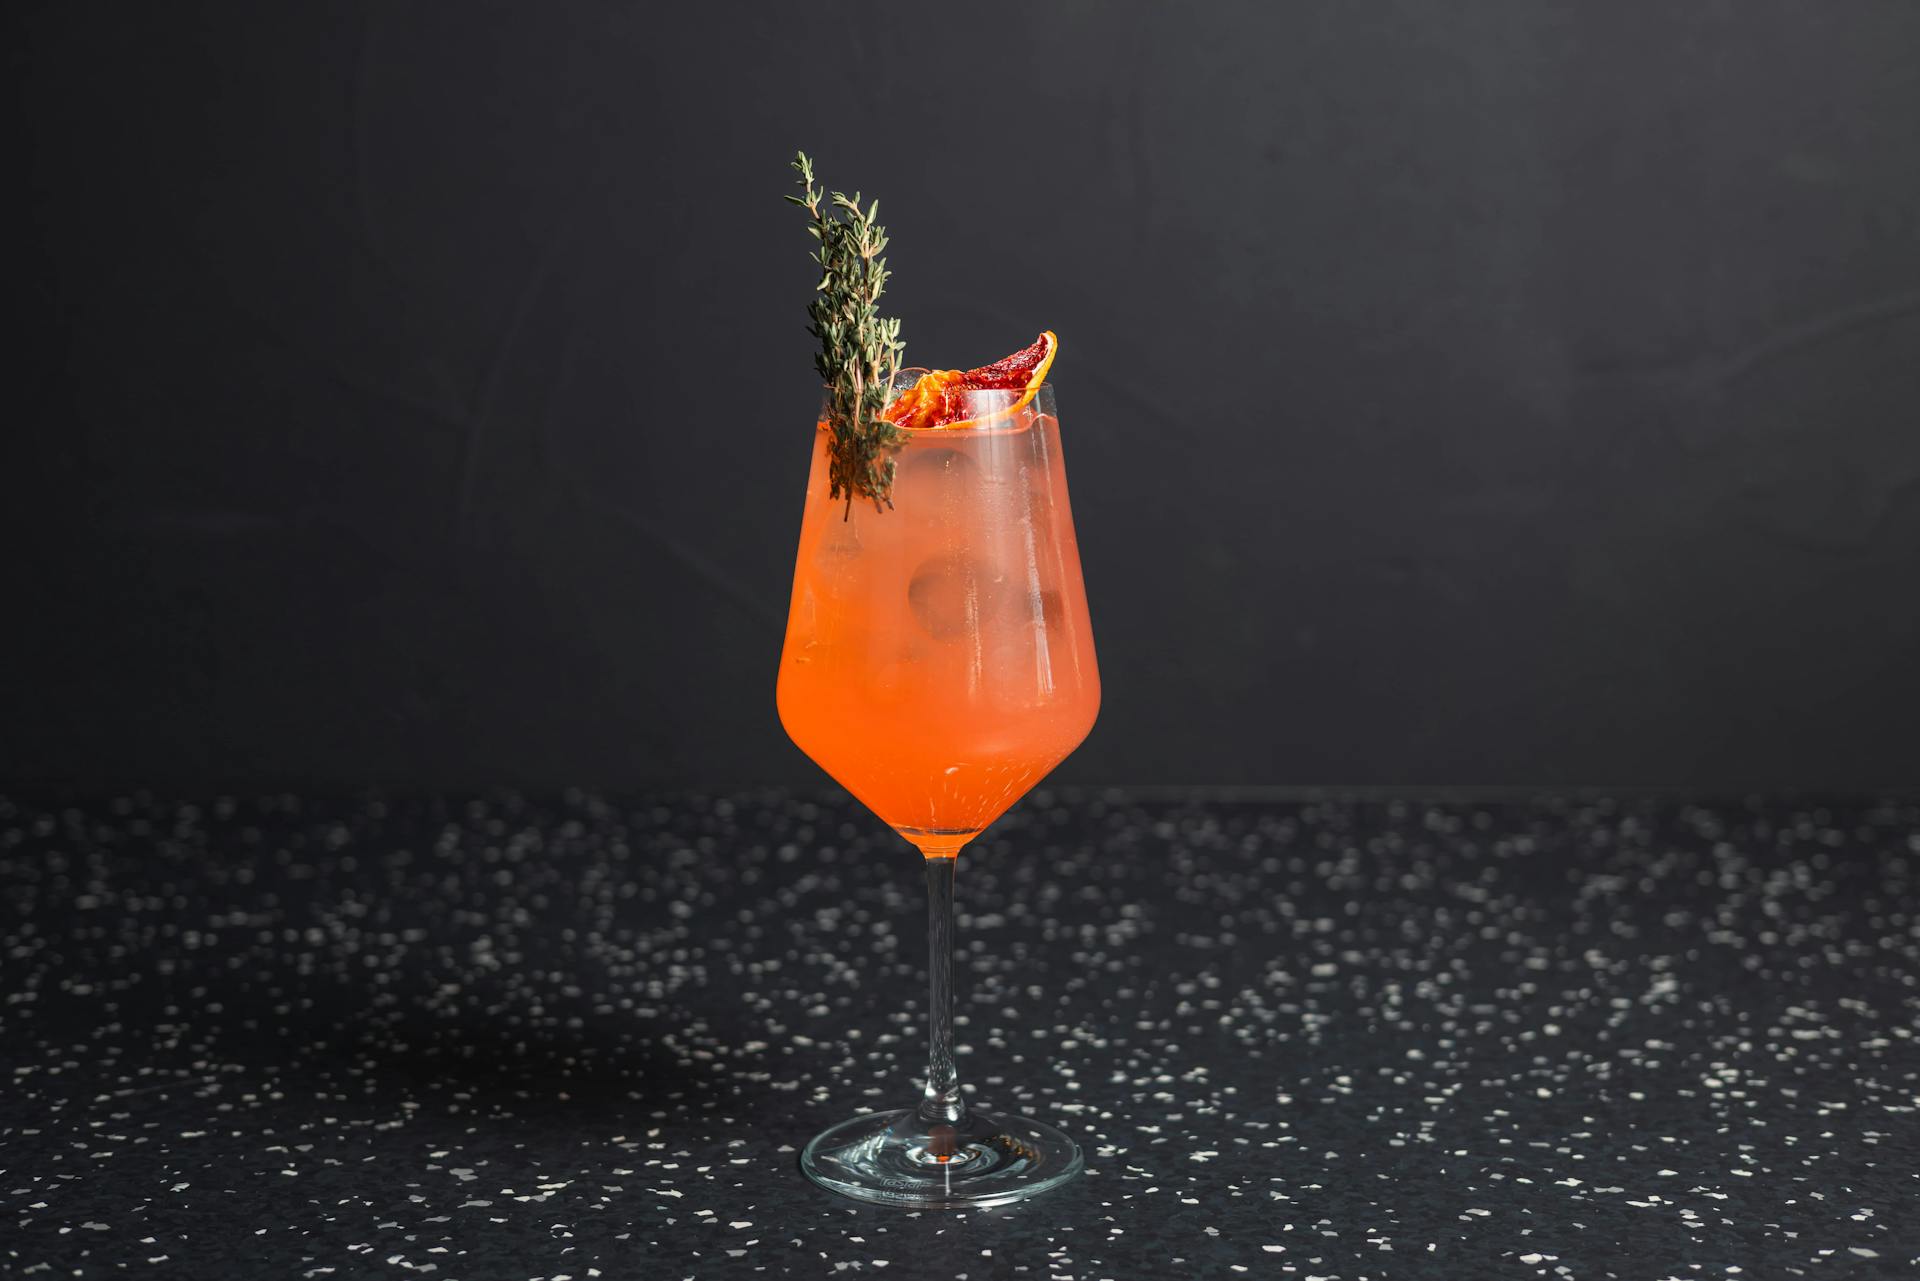 <p>Set the mood for your next French Riviera trip</p>
<p>Base: Lillet infused with thyme, blood orange,&nbsp; lime juice, Wildberry Schwepps&nbsp;</p>